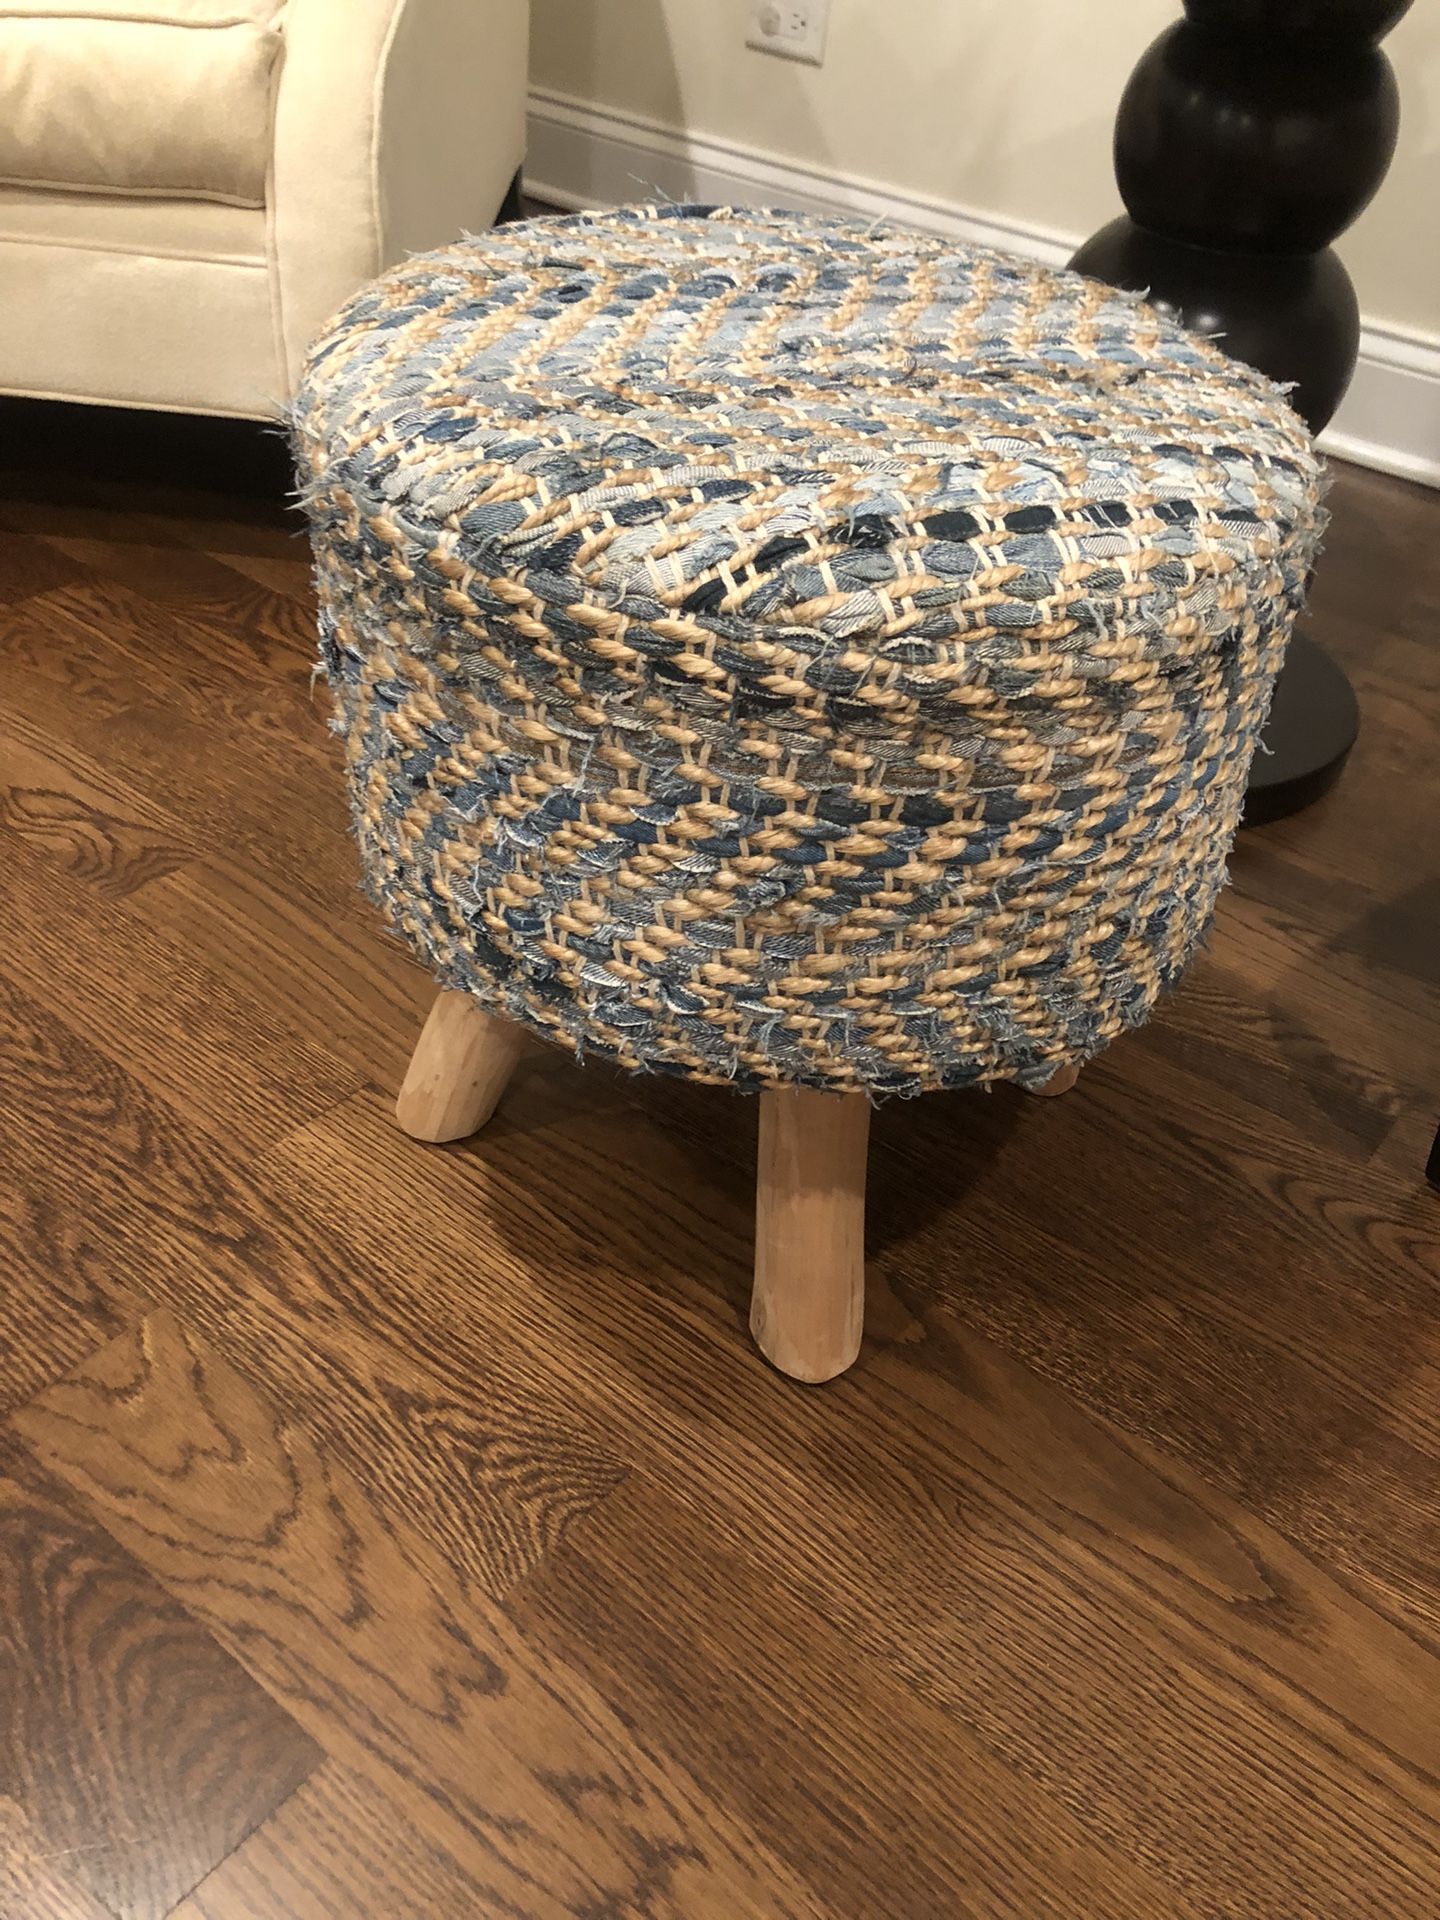 Small Stool For Decorations Or Feet Rest